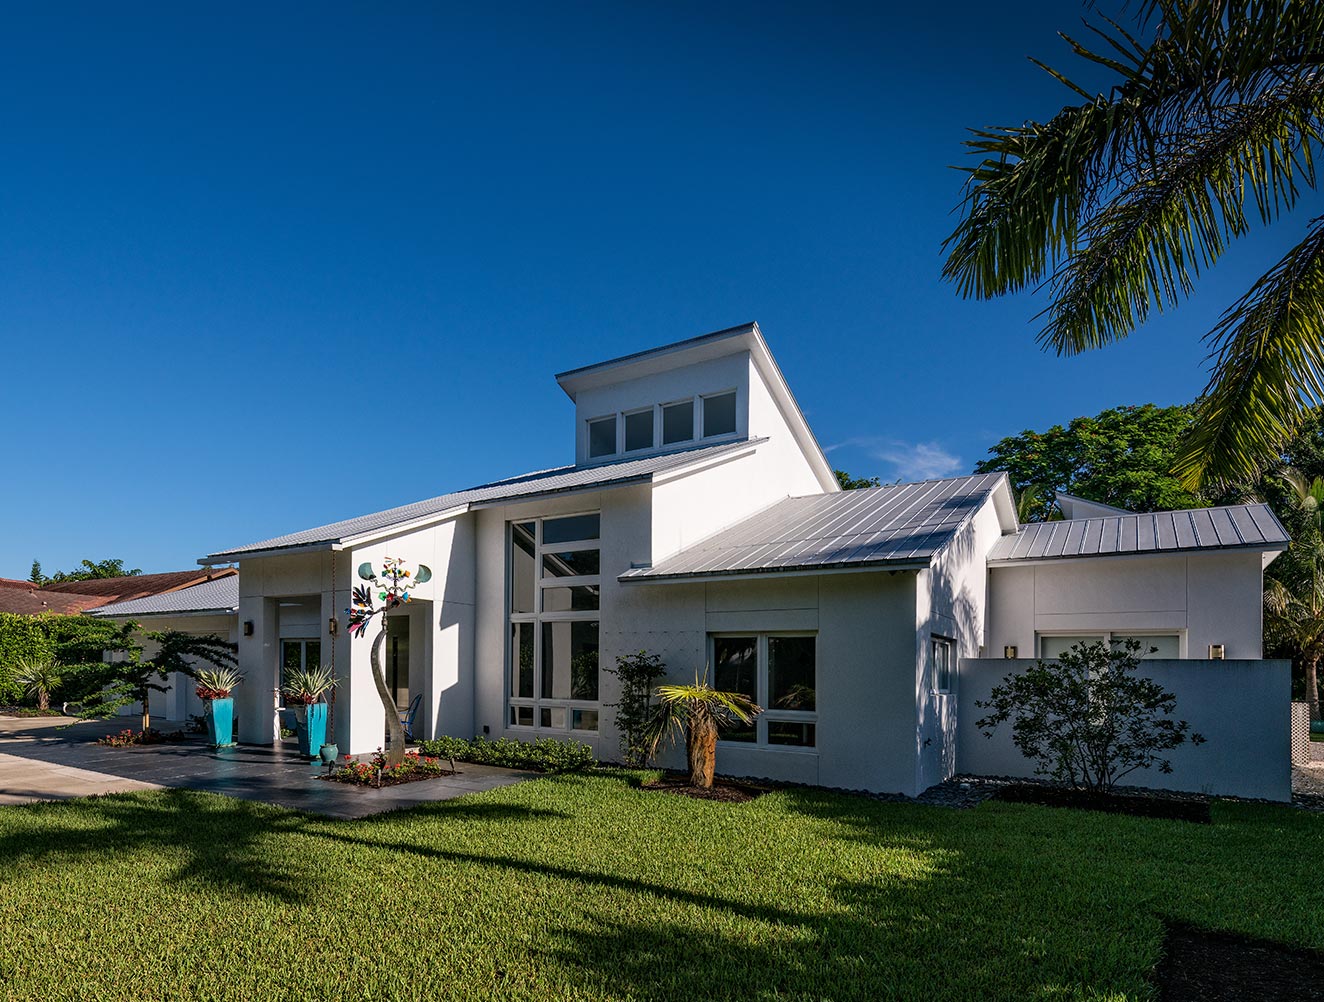 Modern Naples custom home with abstract art installation, landscaping and custom windows